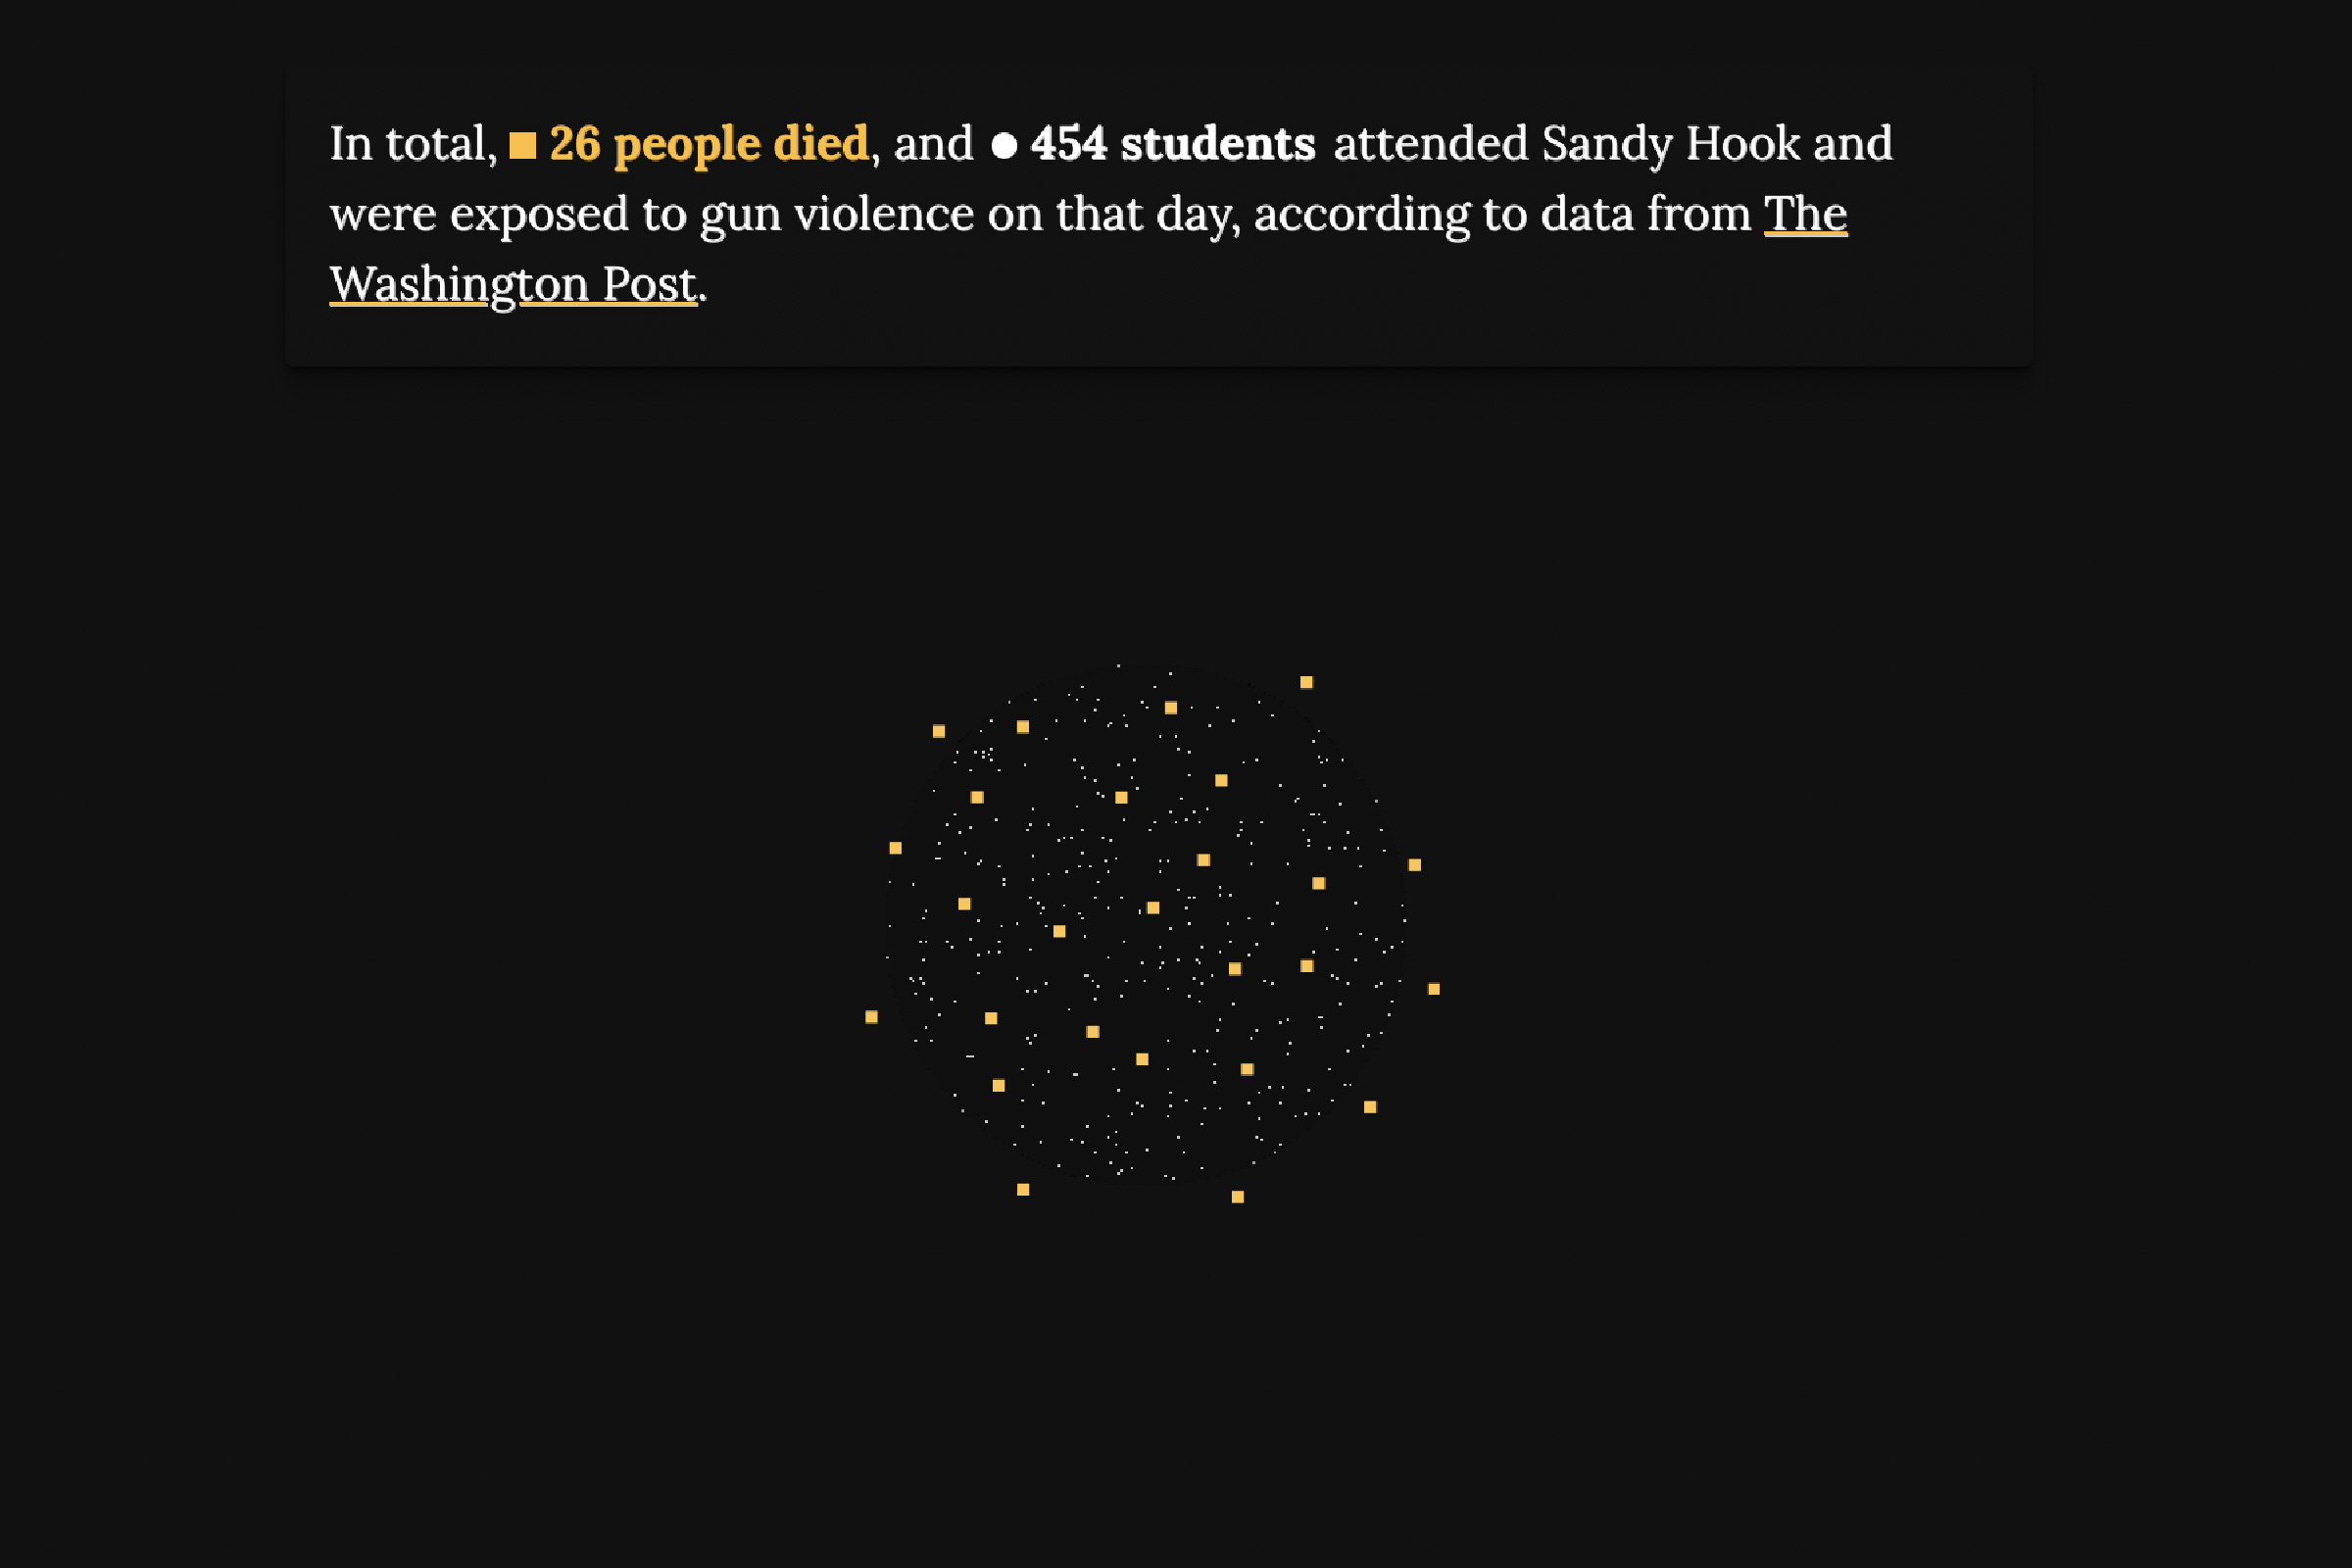 Packed circle chart showing how many people died and were exposed to gun violence at Sandy Hook on the day of the shooting.